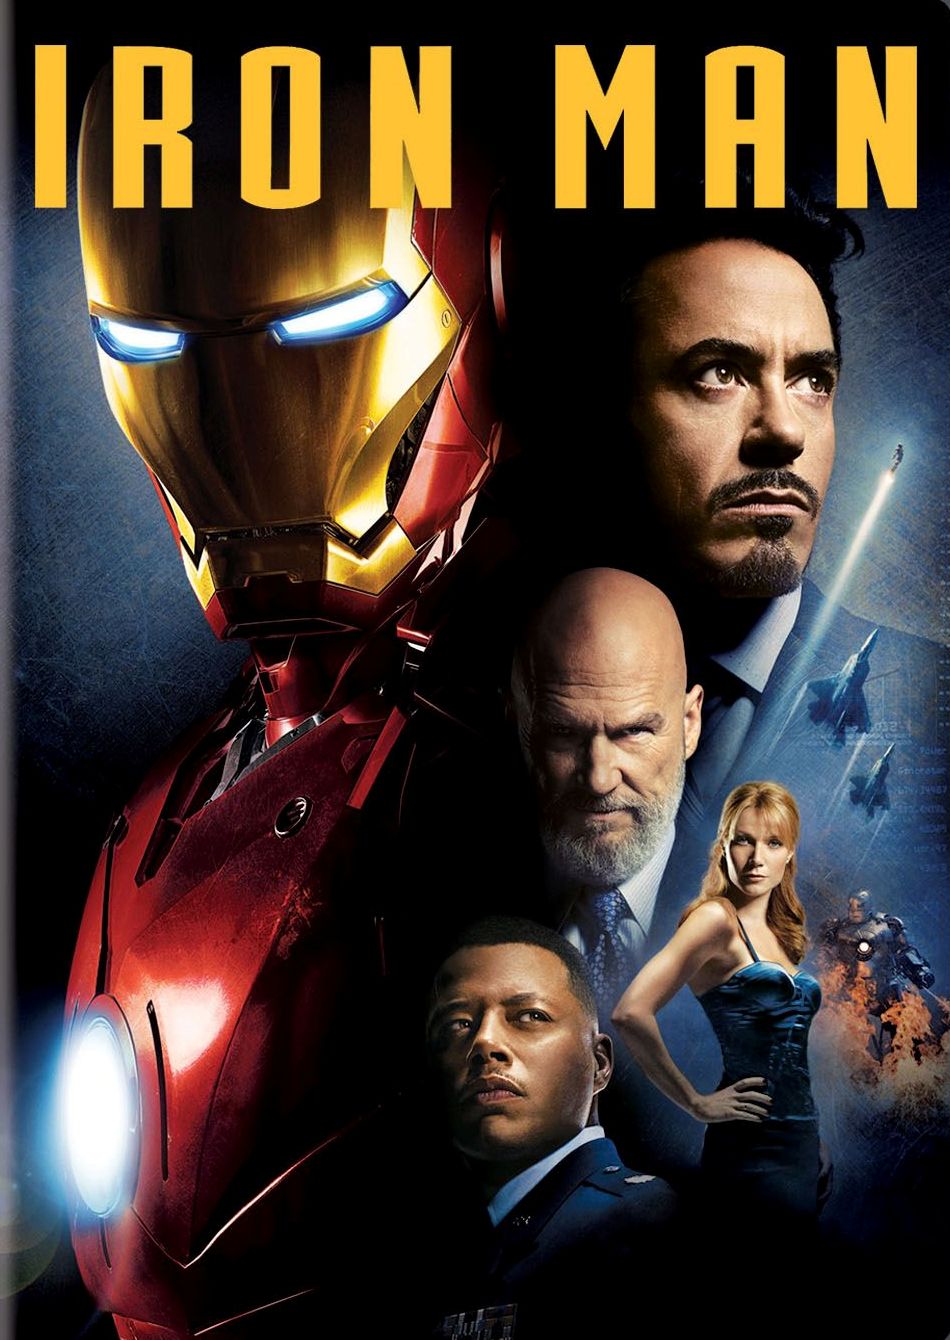 things that lived up to the hype - Iron Man (2008)